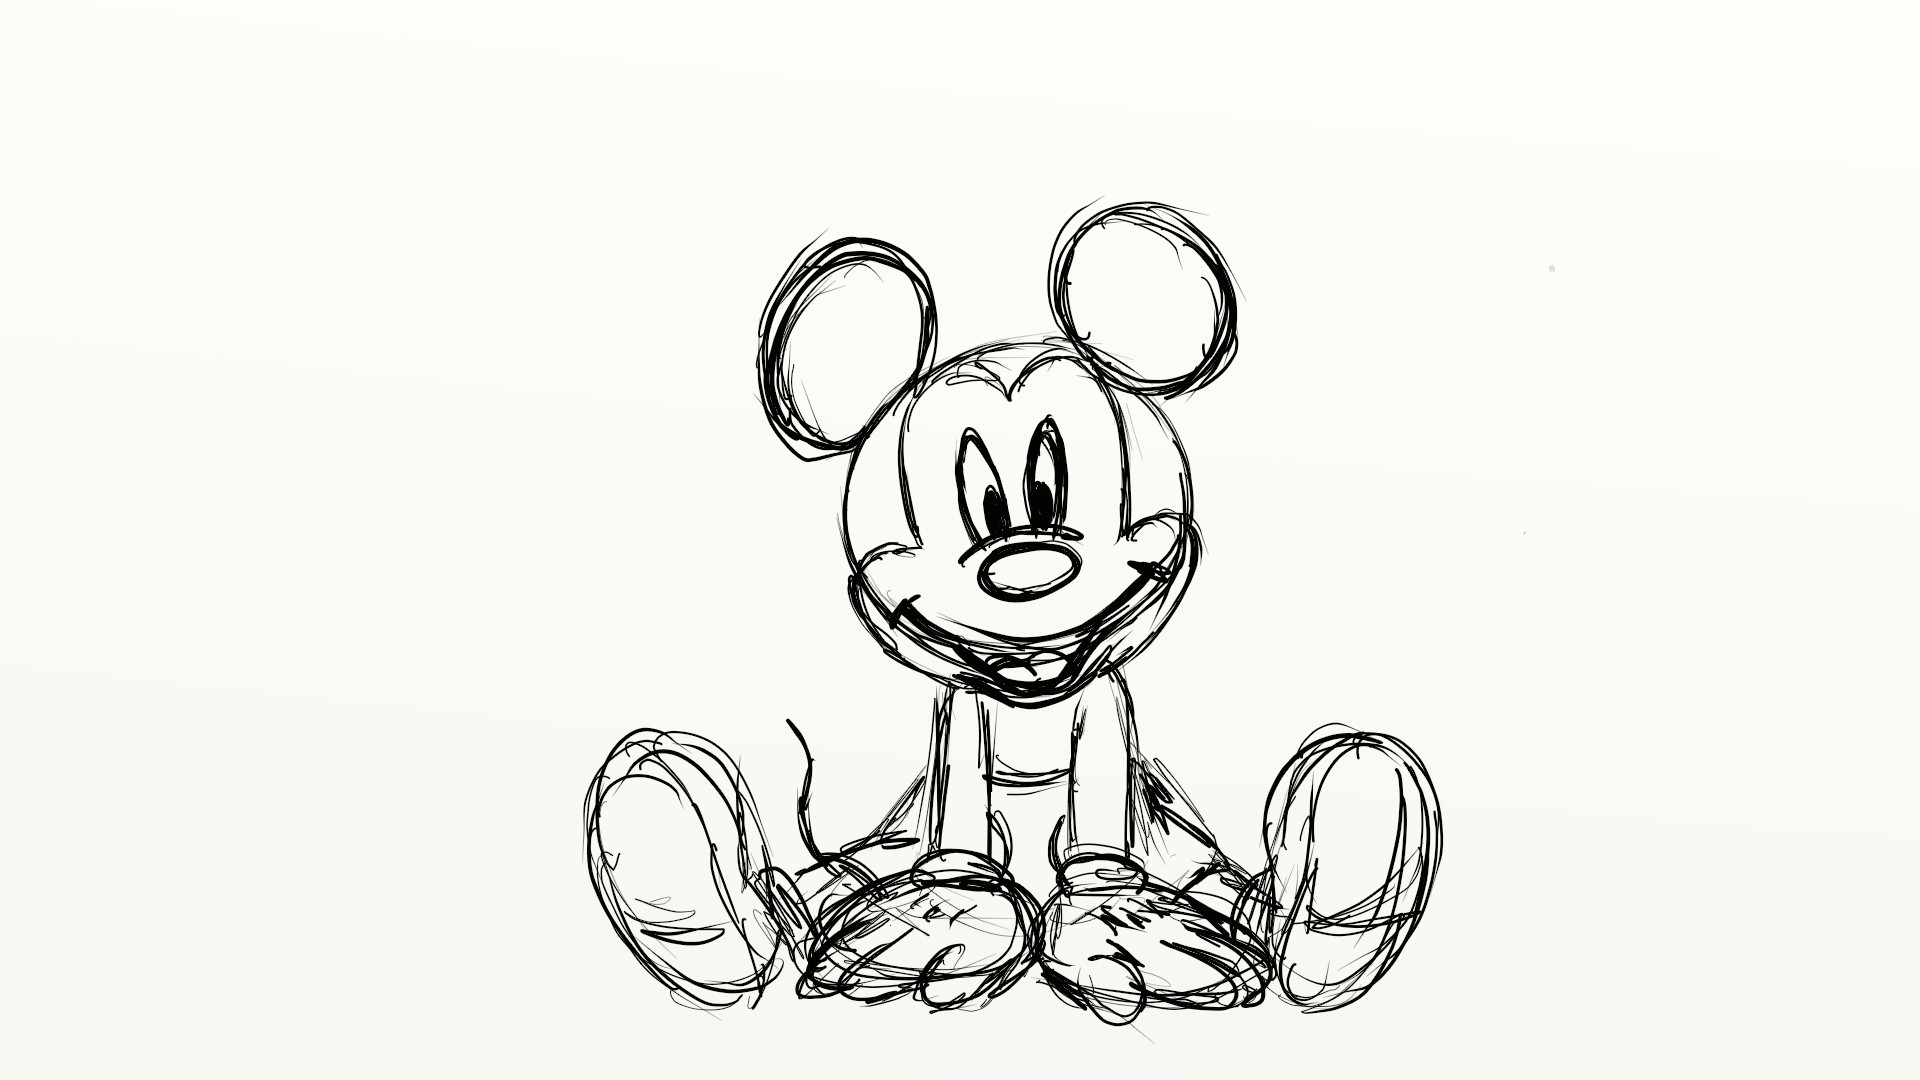 ArtStation - Drawing Mickey Mouse